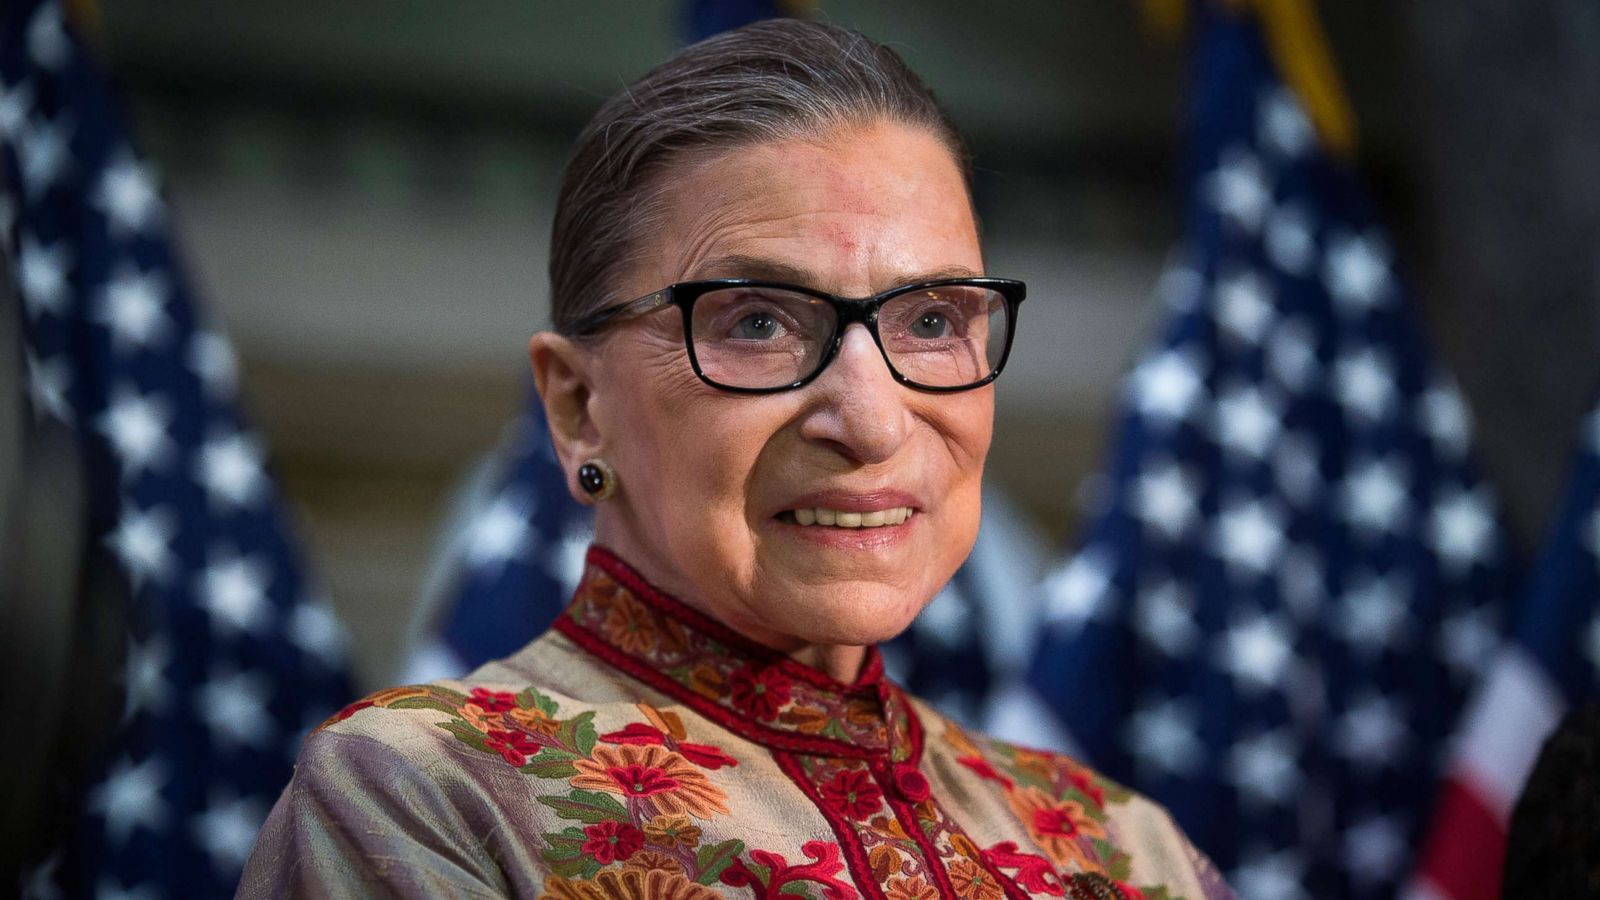 Justice Ruth Bader Ginsburg out of hospital, 'doing well' after suffering 3 fractured ribs from fall